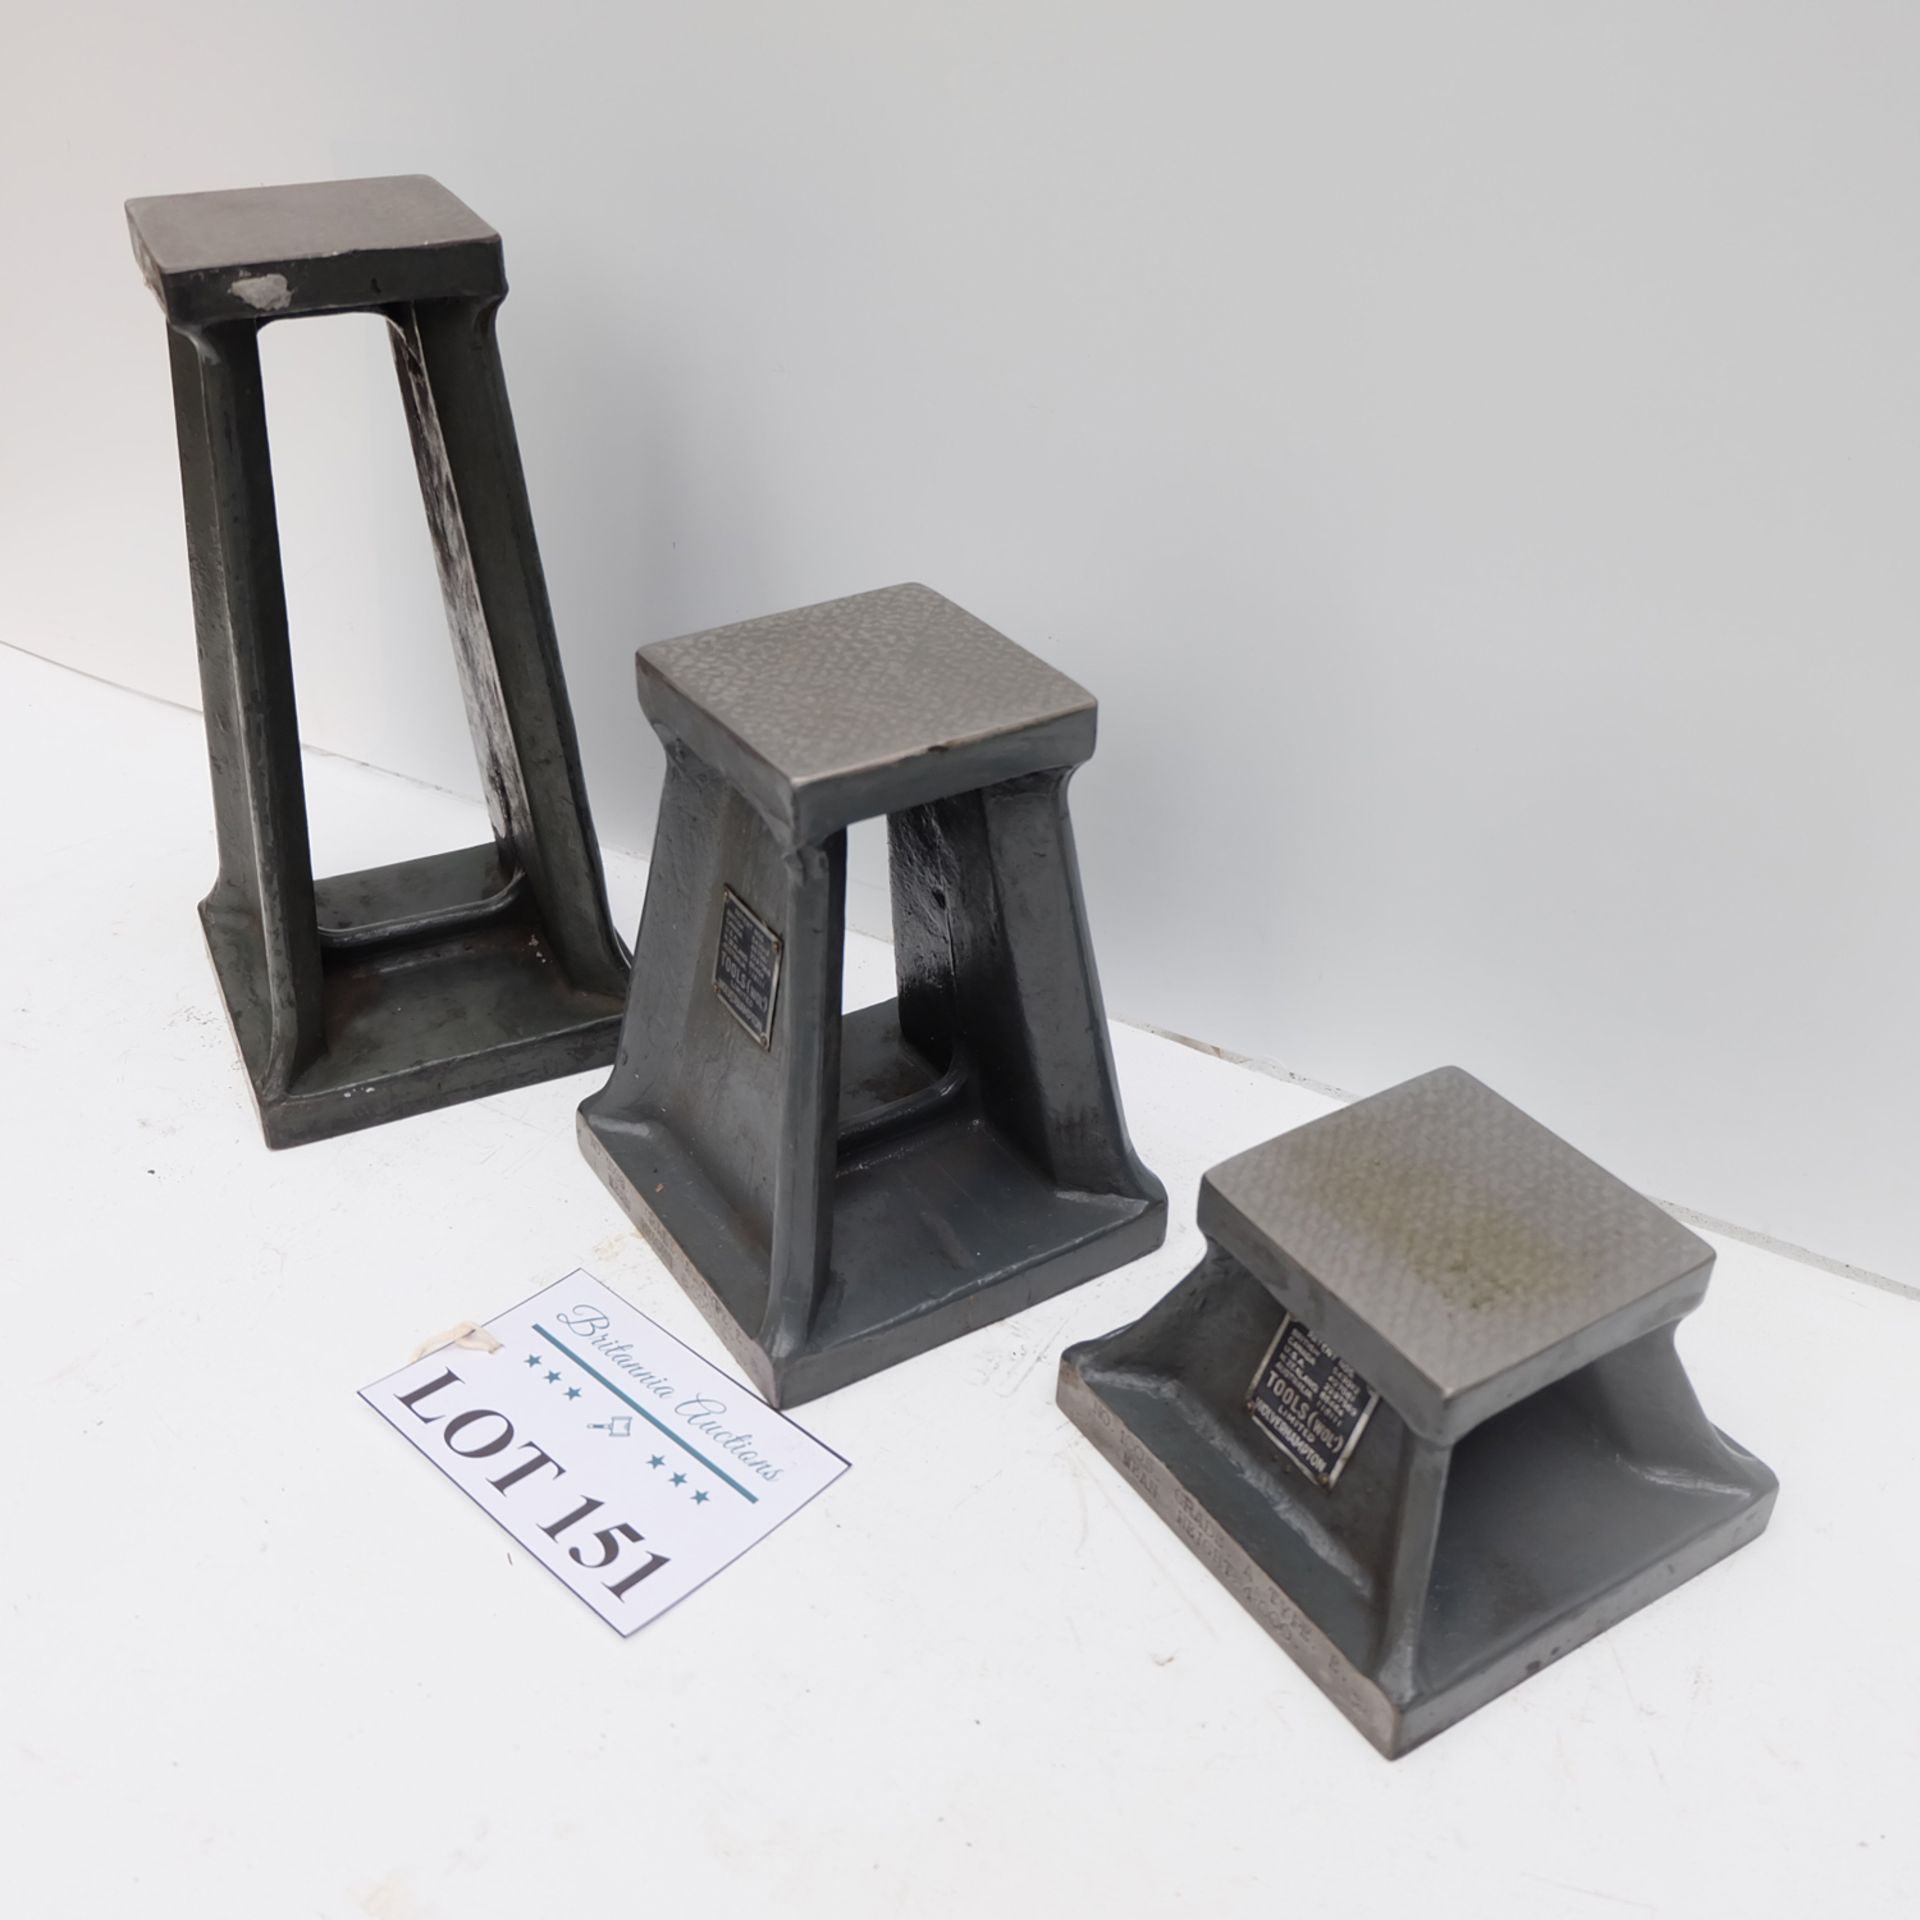 3 x Tools (Wol) Ltd. Height Gauge Extension Towers. - Image 8 of 11